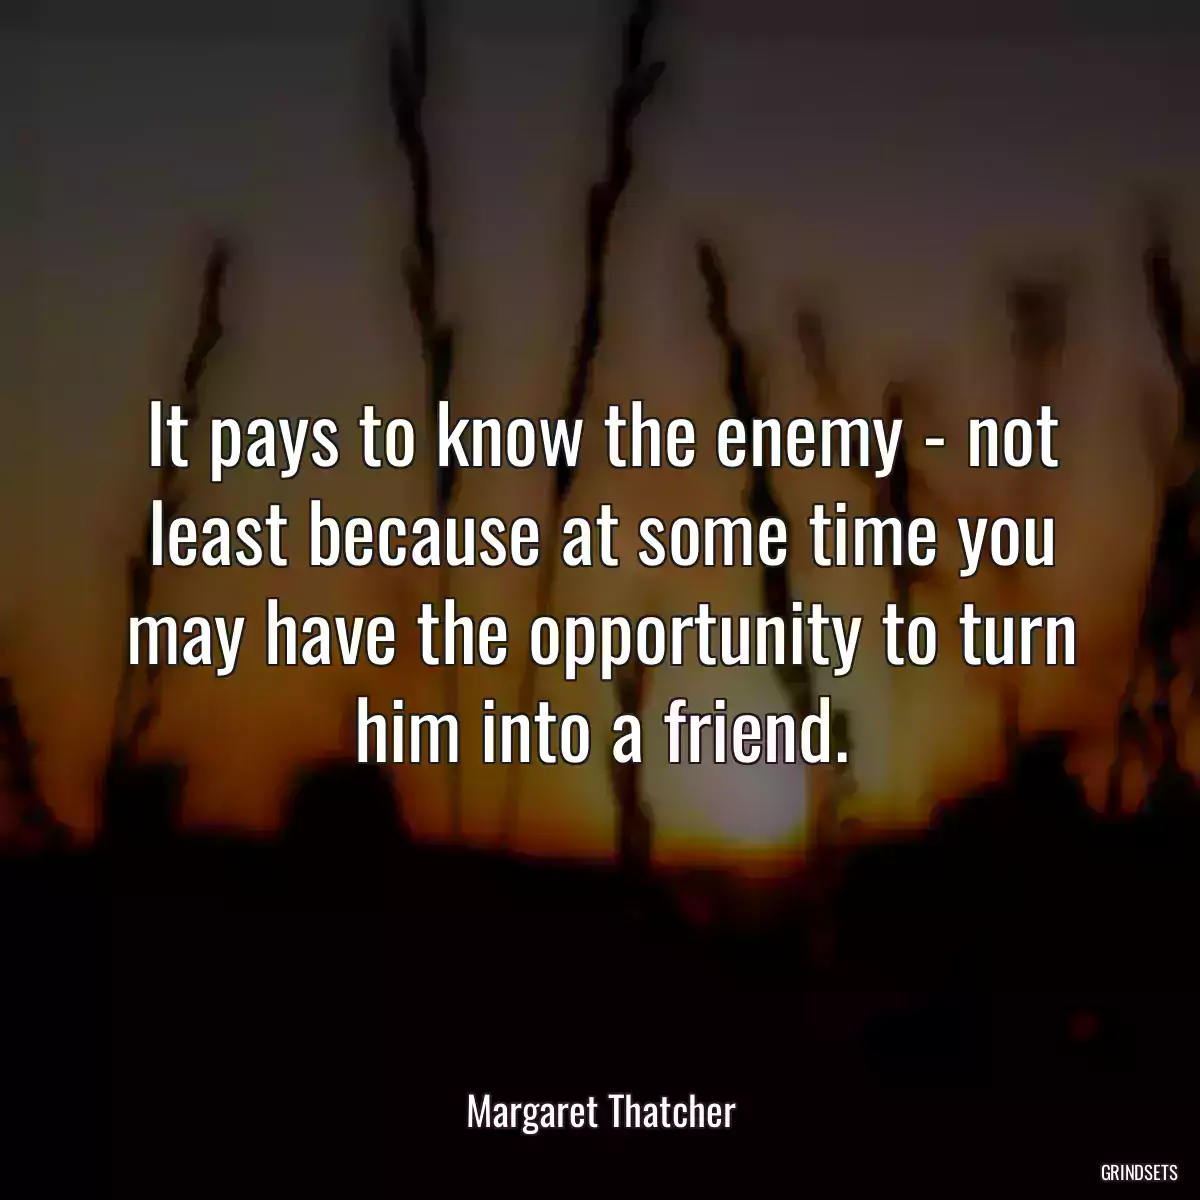 It pays to know the enemy - not least because at some time you may have the opportunity to turn him into a friend.